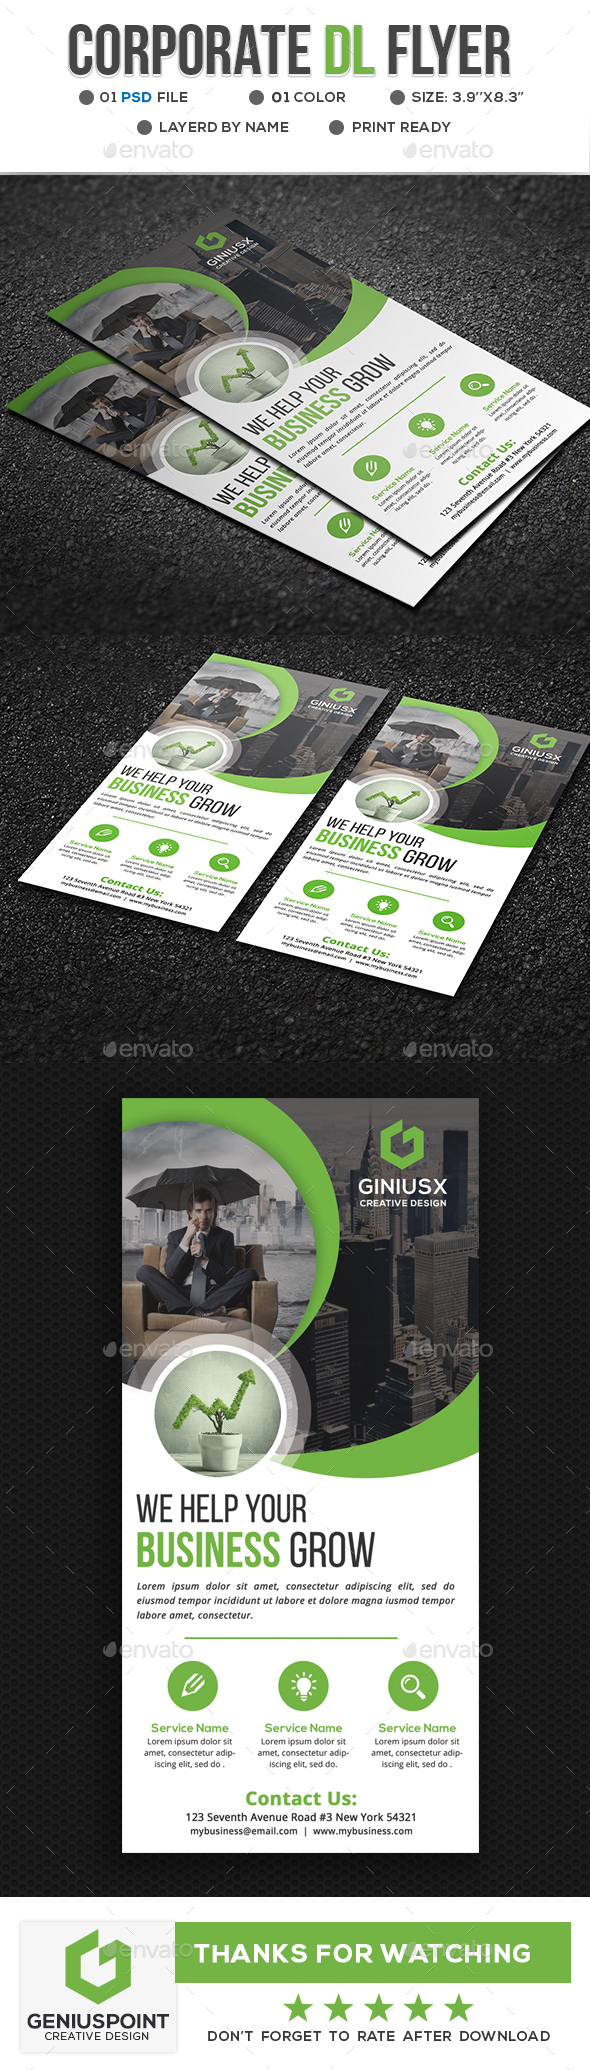 GraphicRiver Corporate DL Flyer 20895283